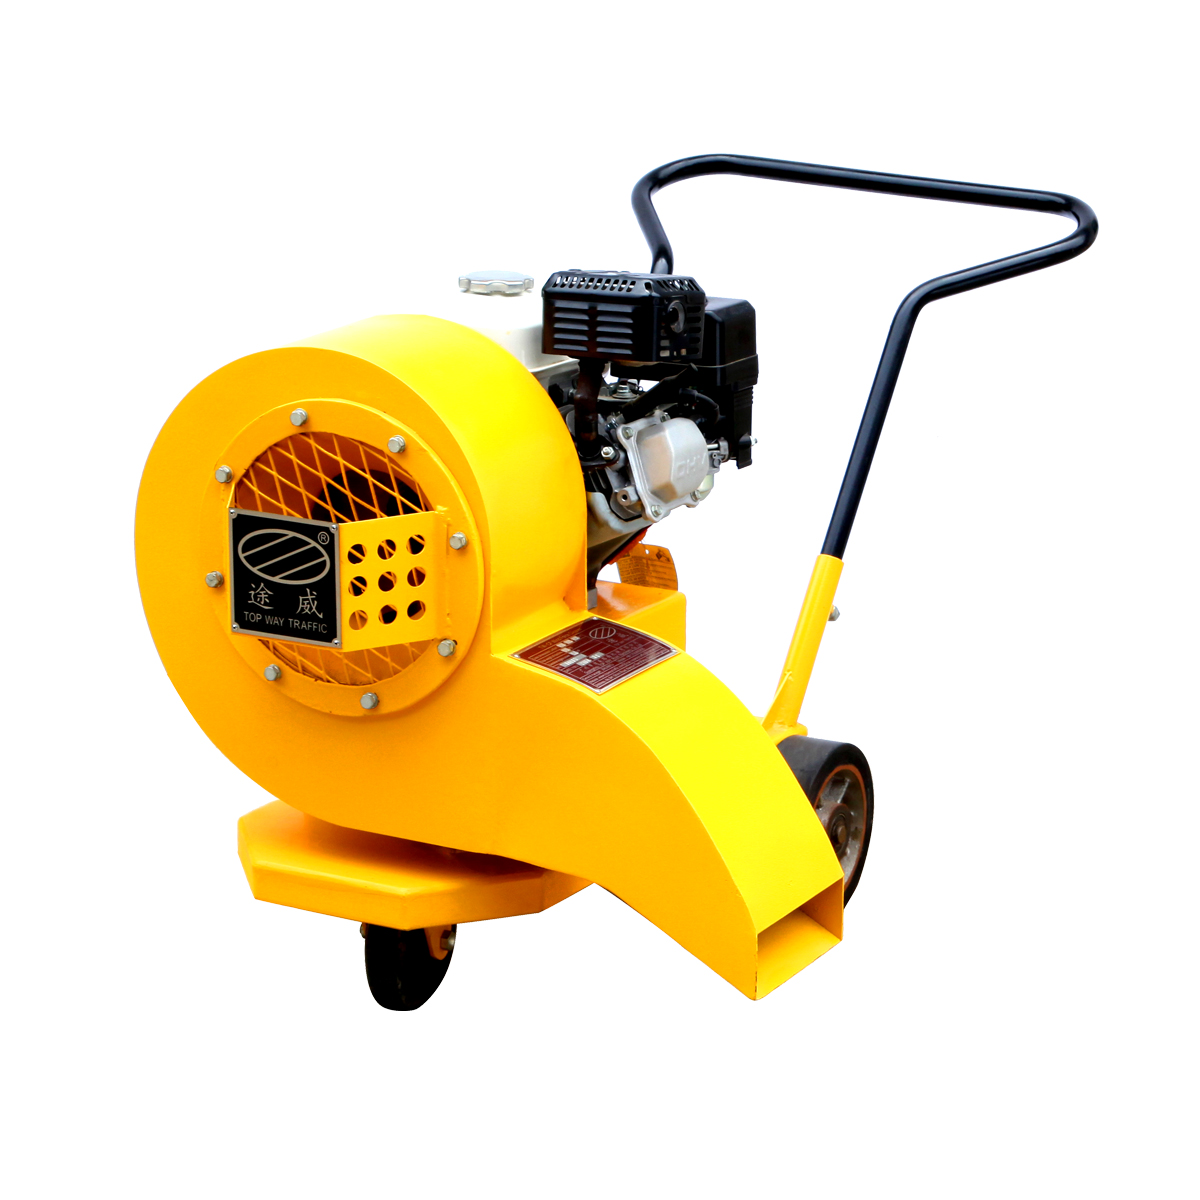 TW-CF Wind Force Cleaner